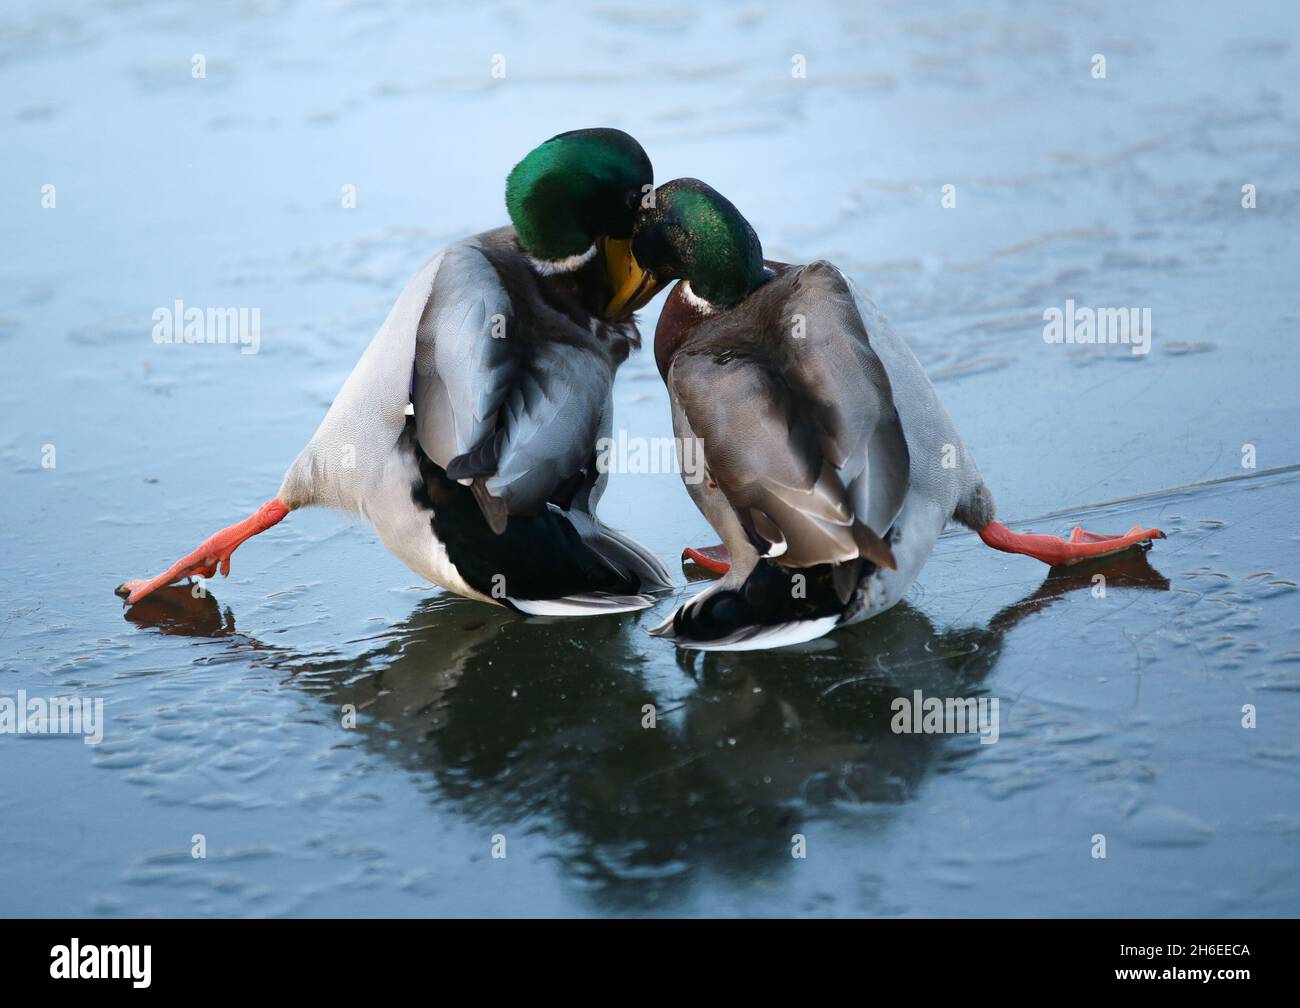 Two ducks hold each other up as they slide on a icy pond in East London. Stock Photo